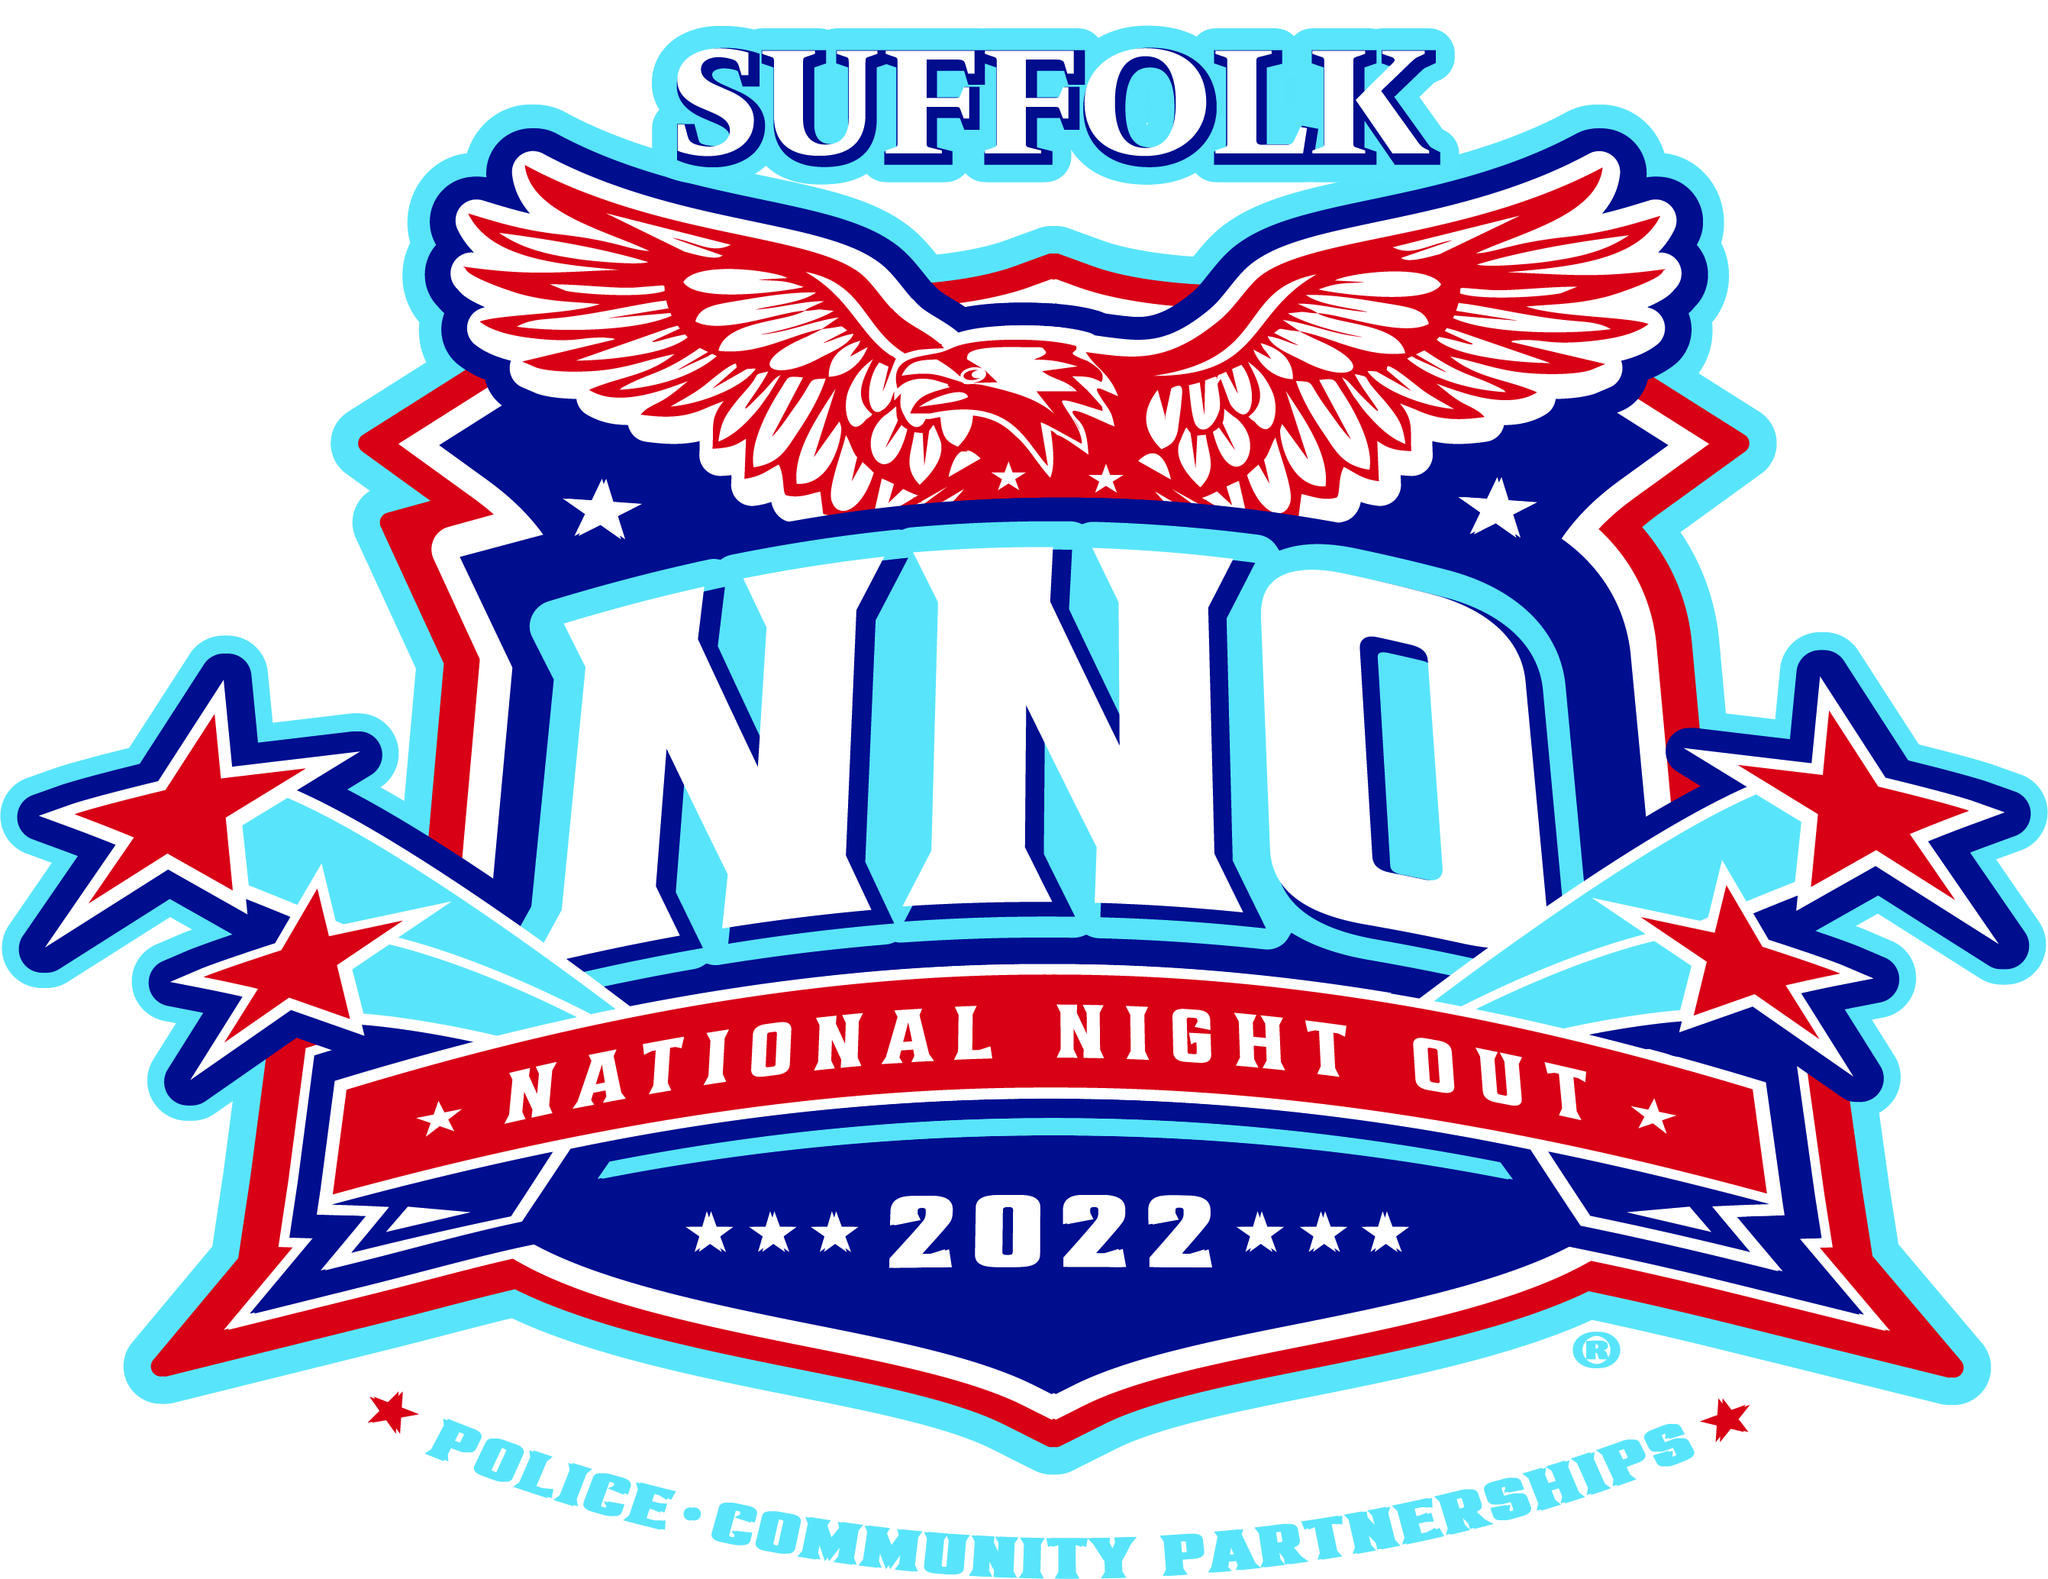 Register Your Community for National Night Out! (City of Suffolk